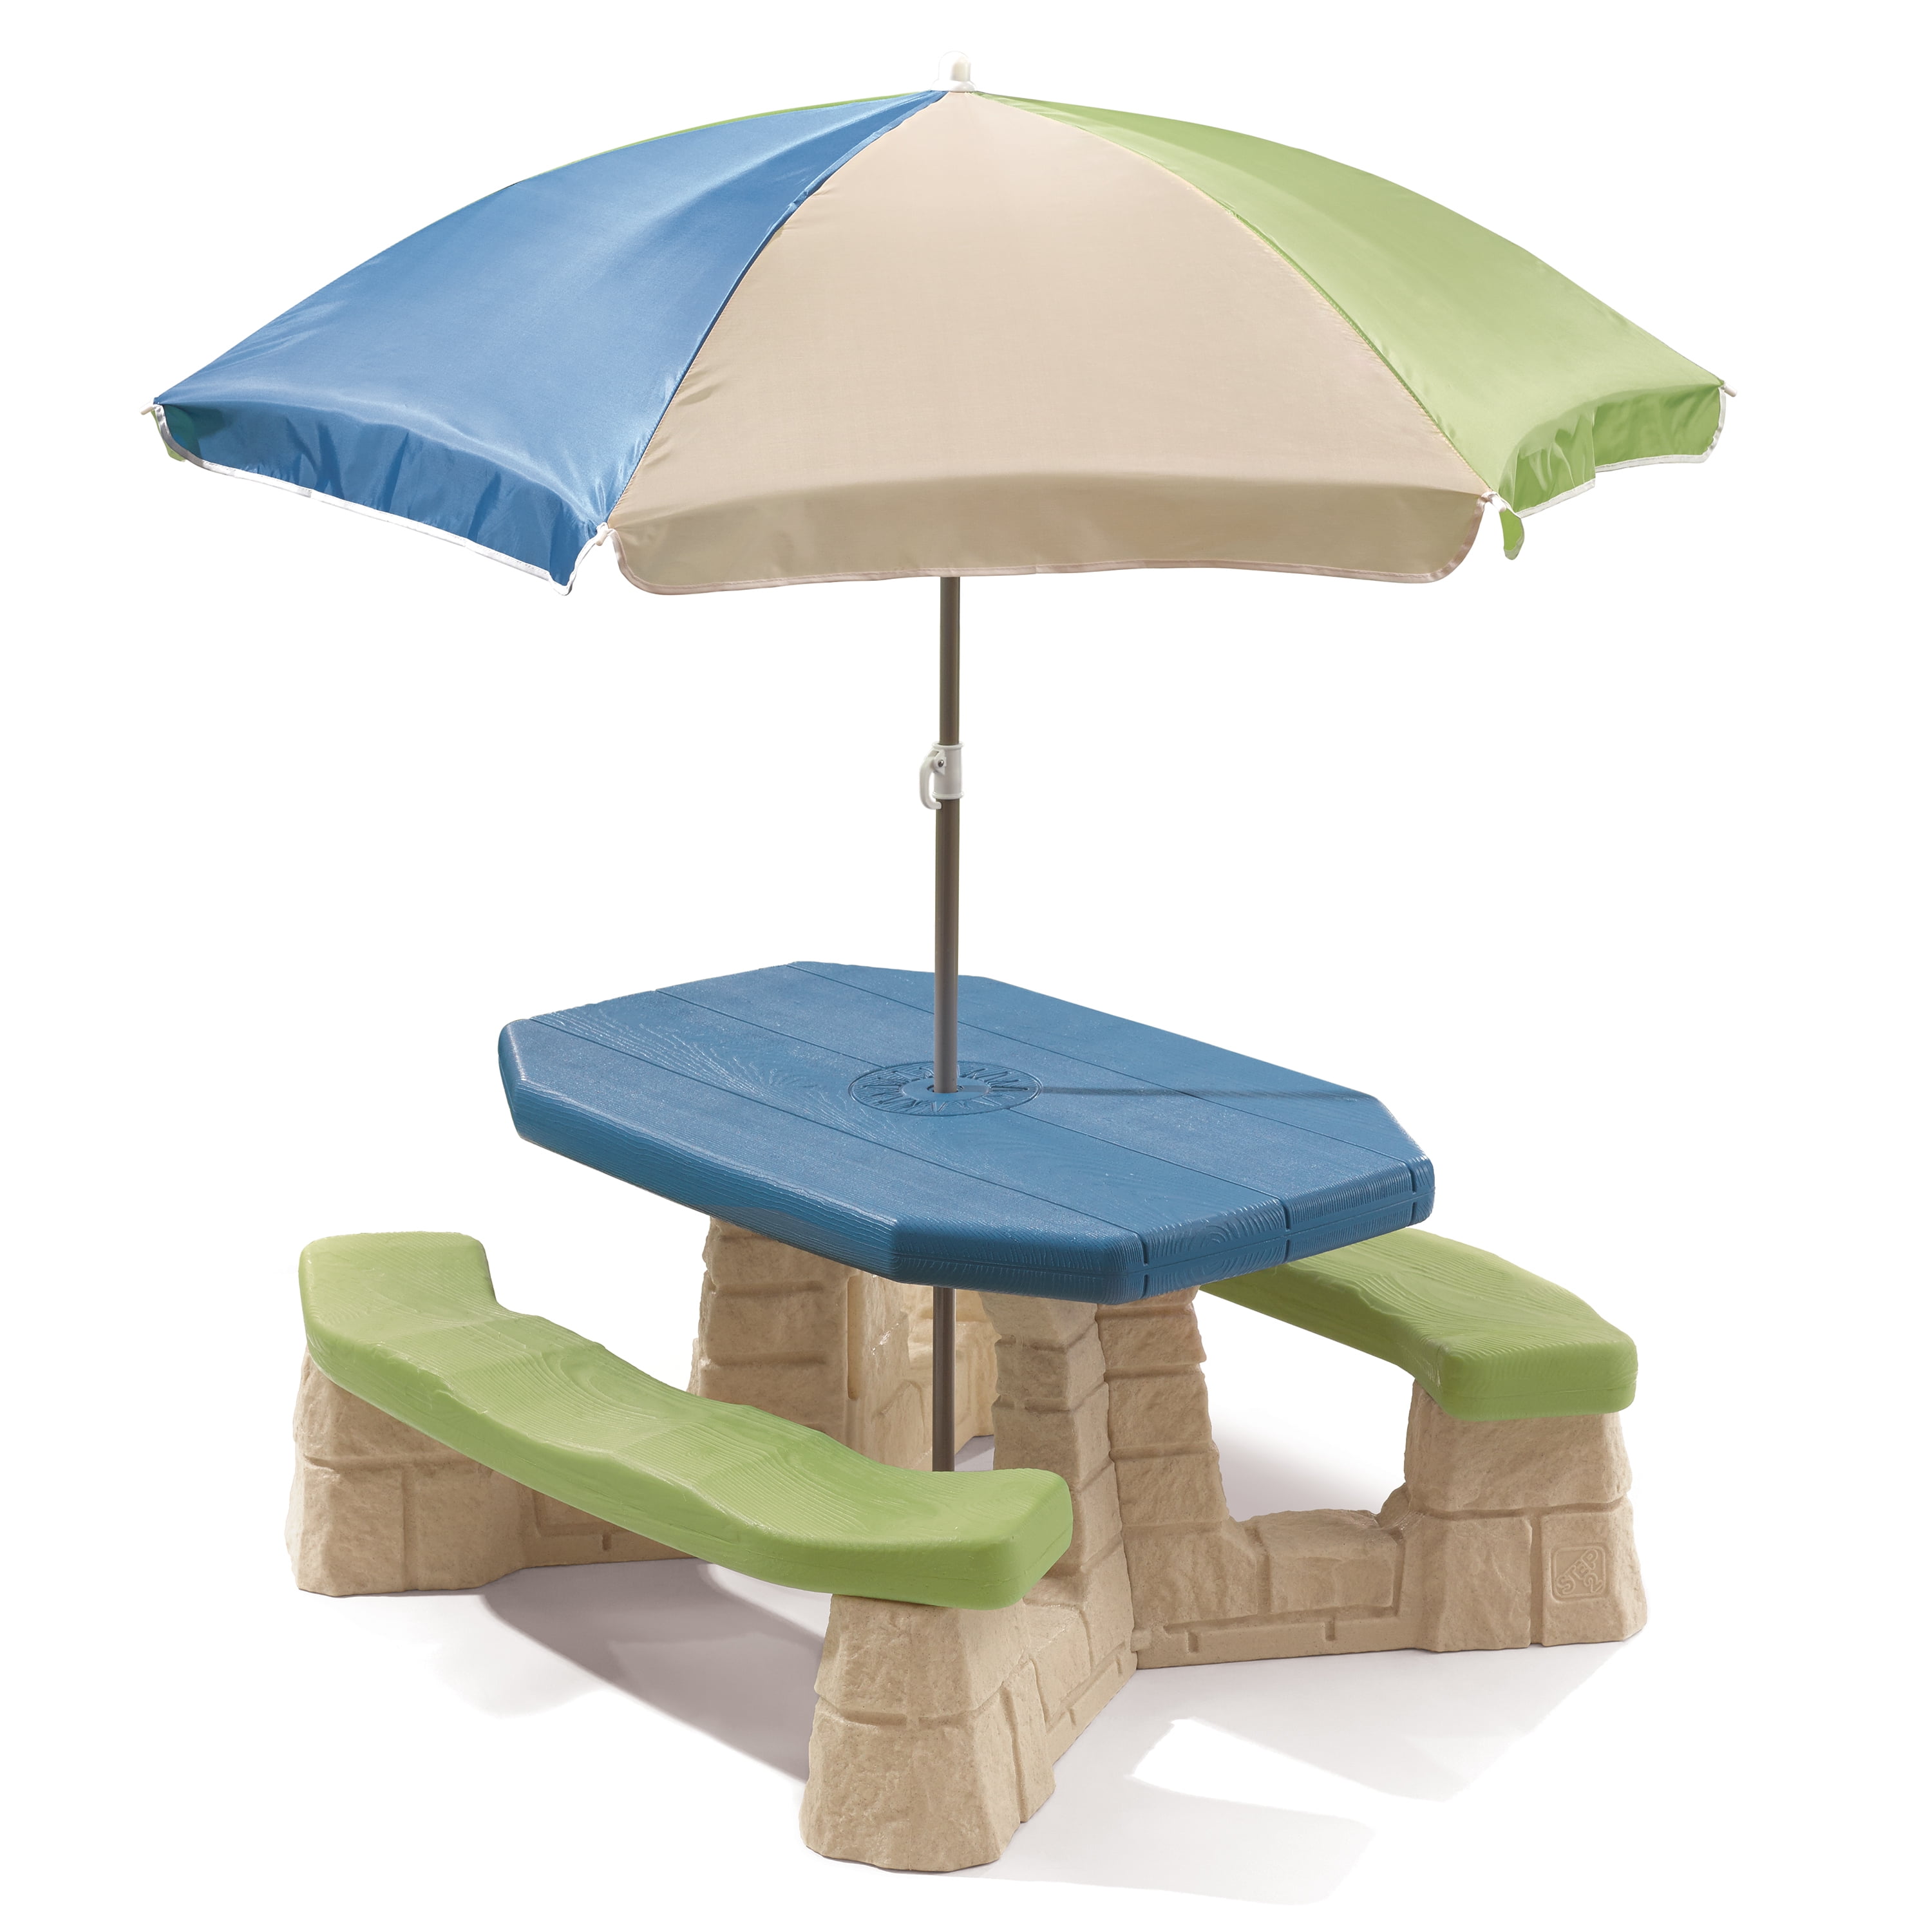 Little Tikes Easy Store Jr. Picnic Table with Umbrella - Blue 